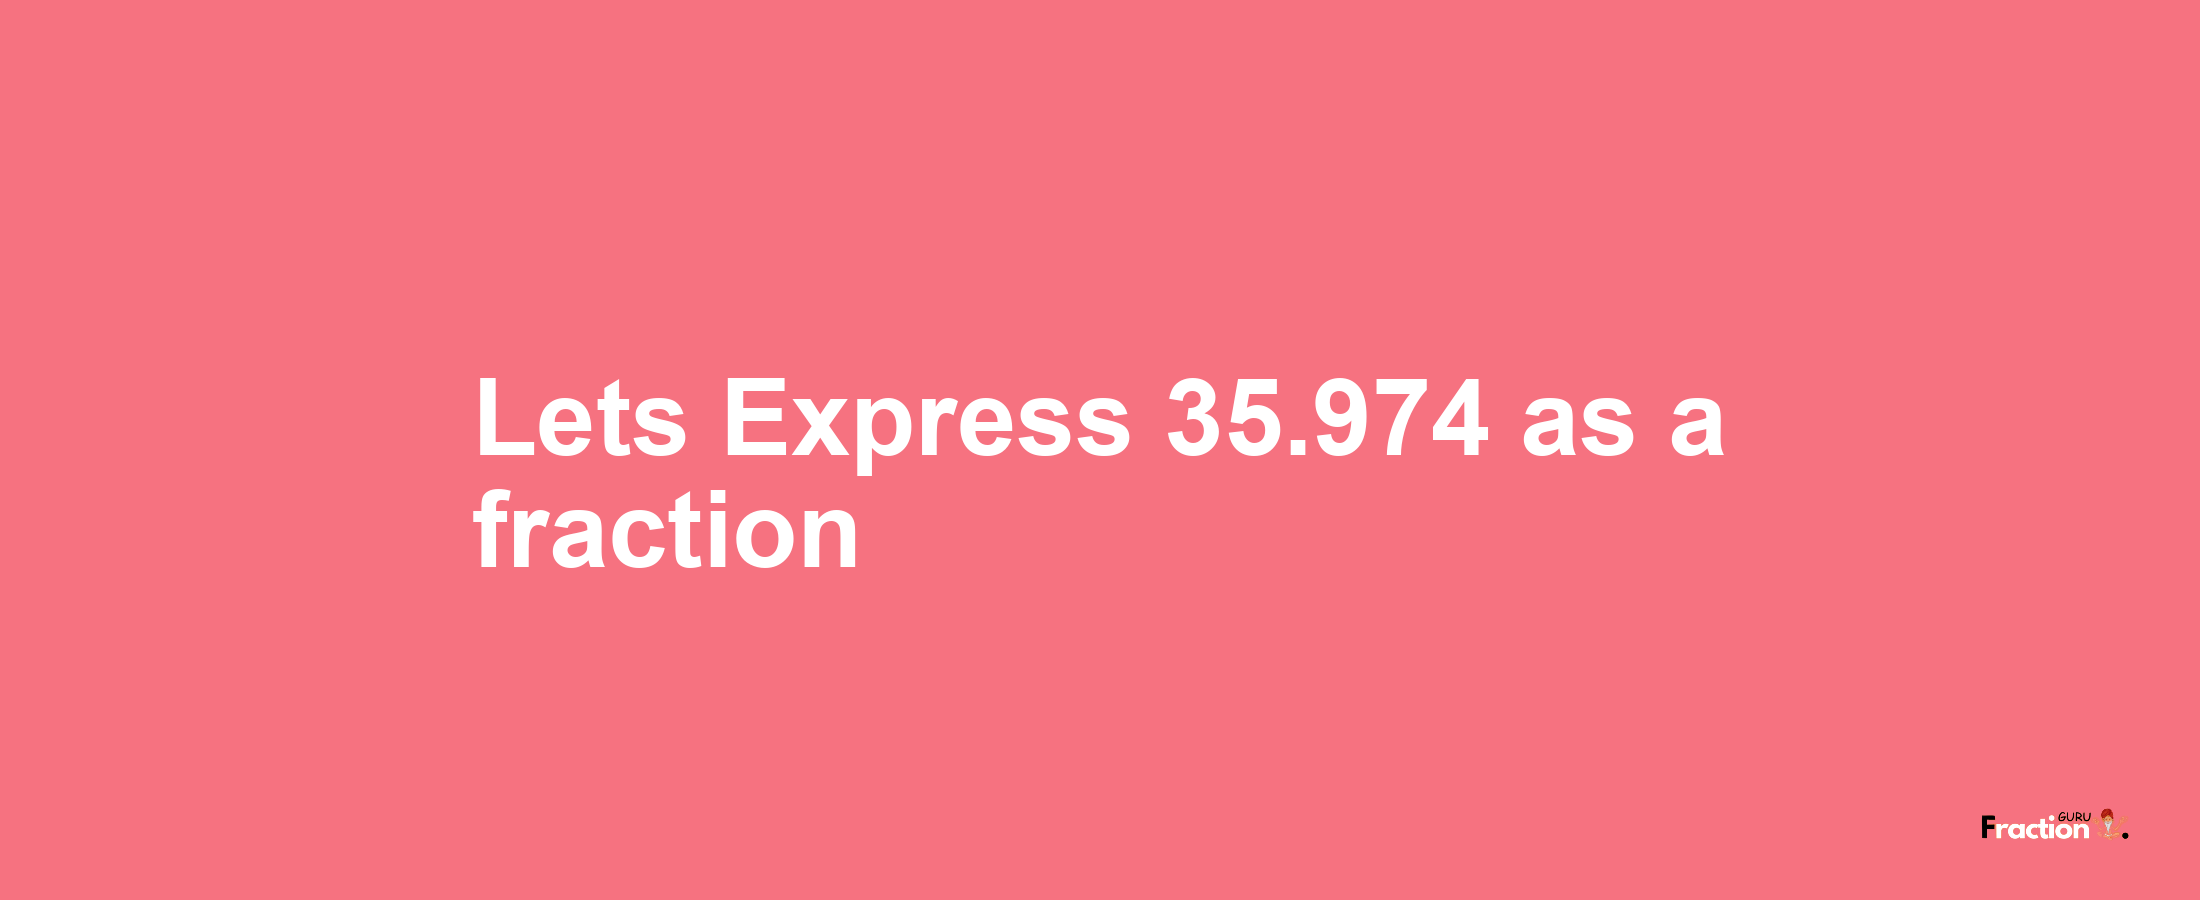 Lets Express 35.974 as afraction